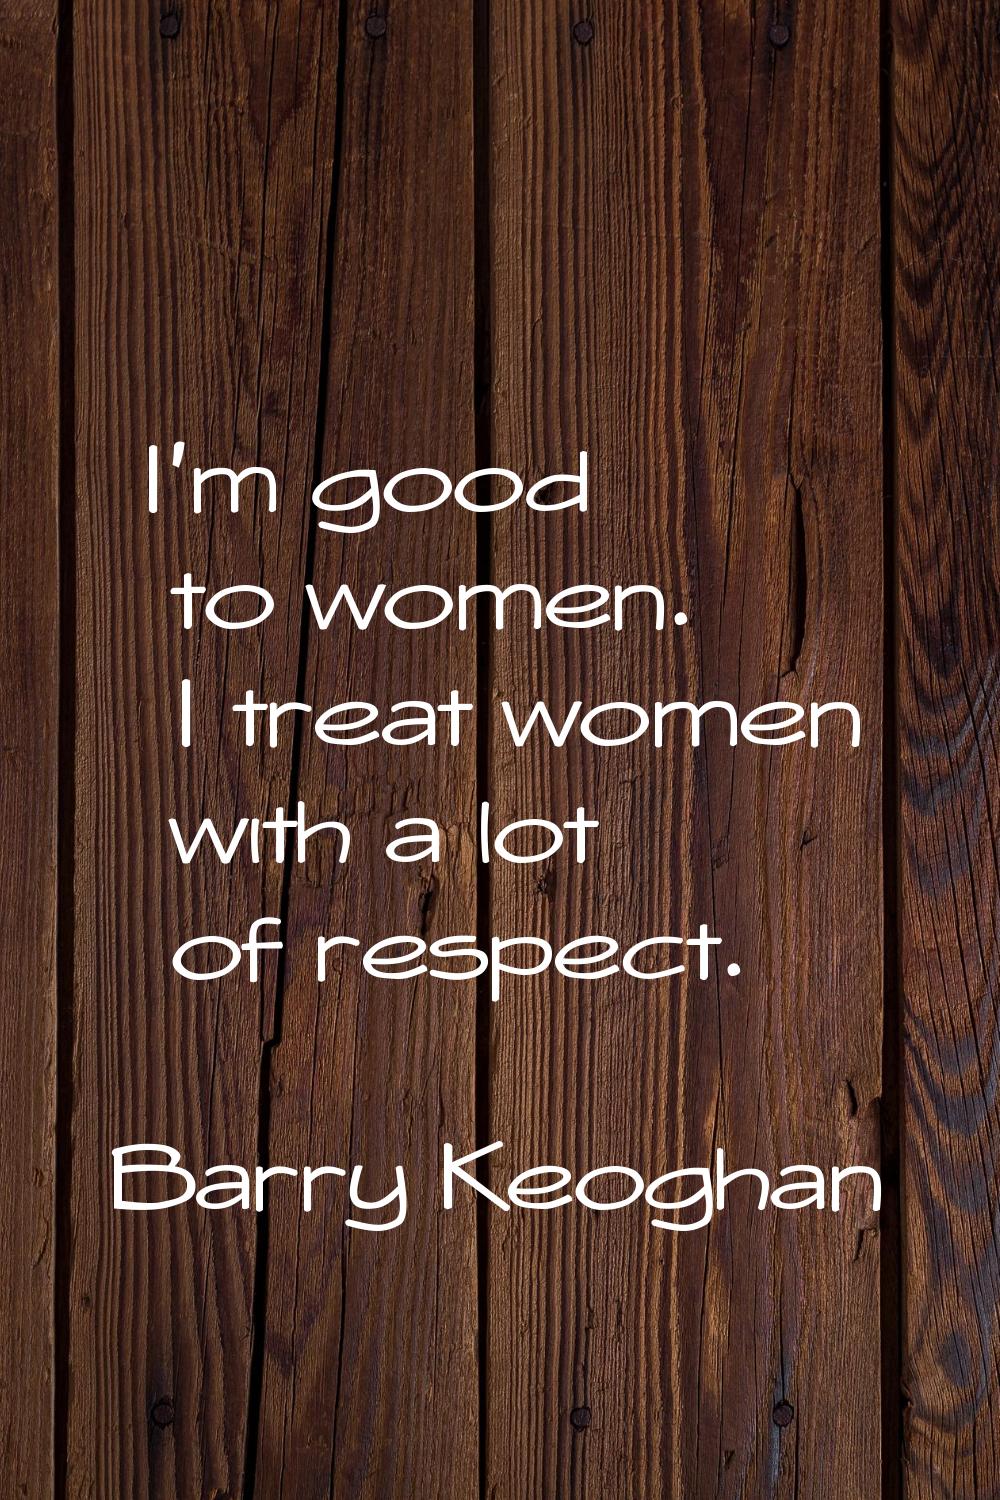 I'm good to women. I treat women with a lot of respect.